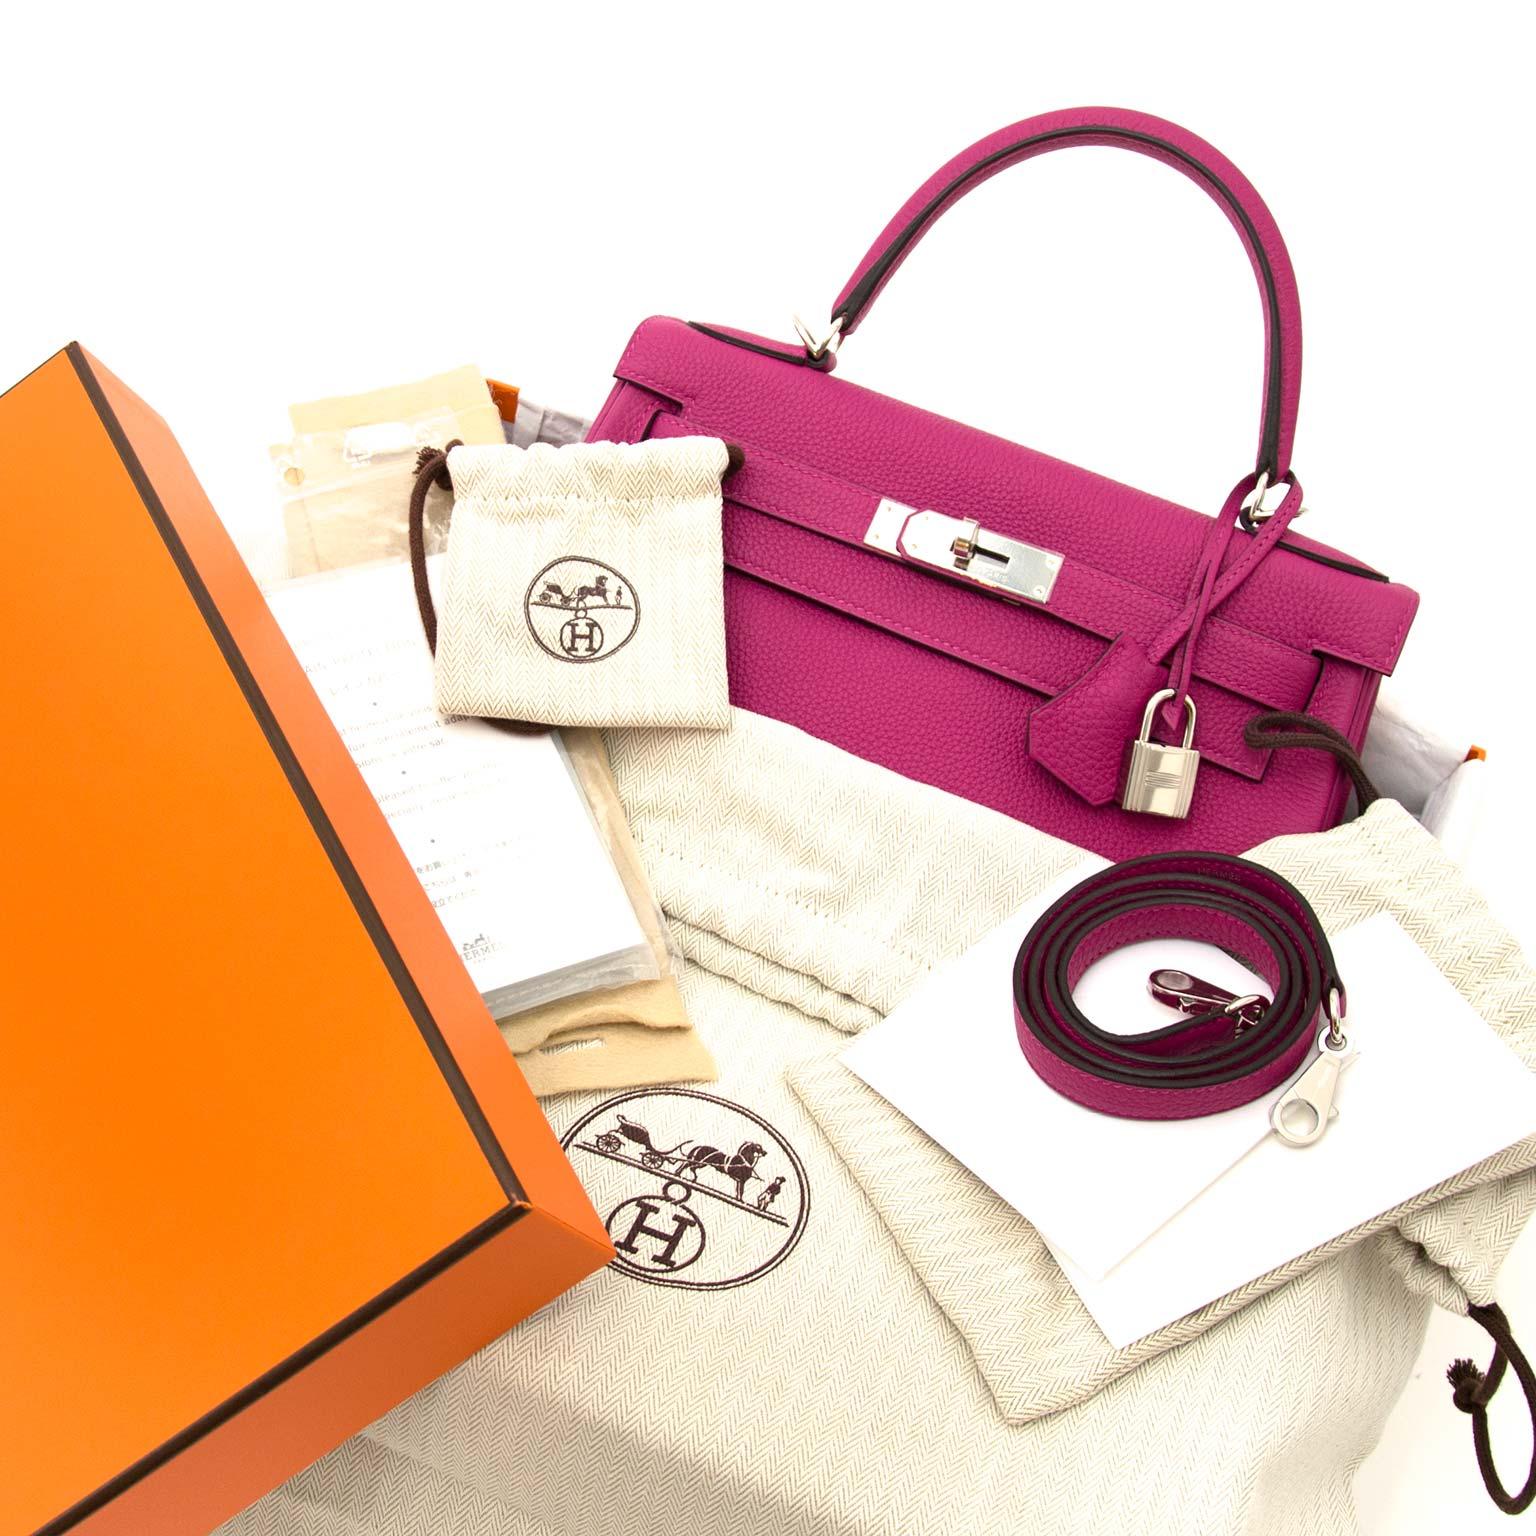 This stunning and eyecatching Kelly bag by Hermès comes in 'Rose Pourpre' Togo leather which is a deep and vibrant purple color.

Togo is a grainy yet smooth leather which keeps its form very well. It's also almost 100% scratch resistant.

Be unique